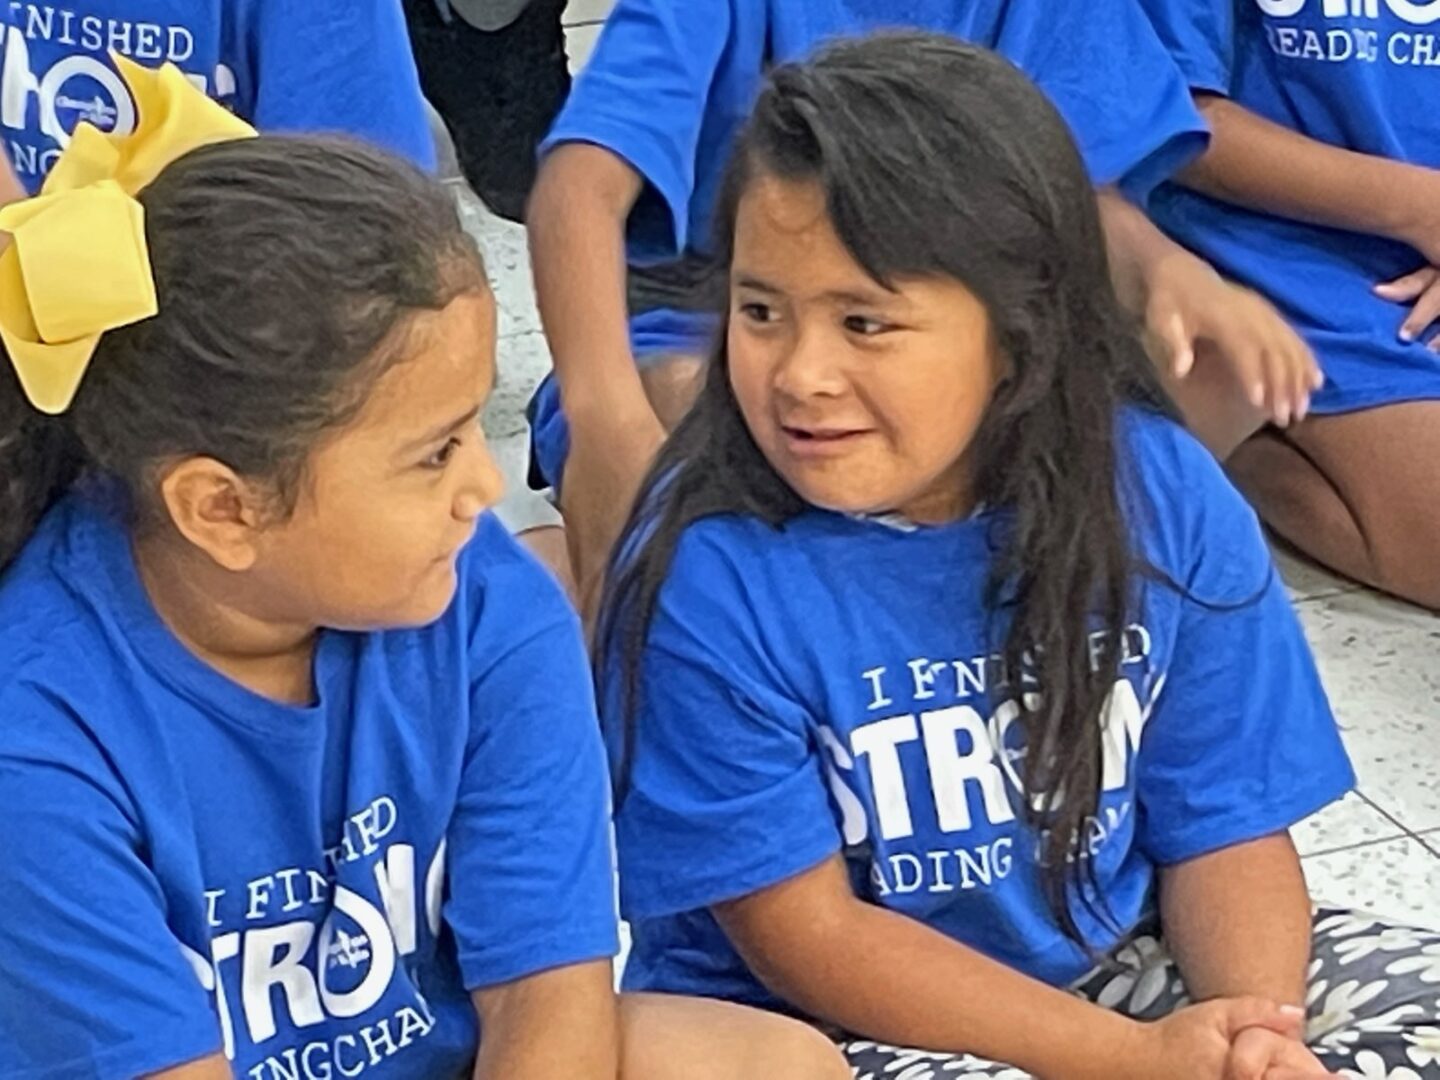 Two girls in blue shirts are sitting next to each other.